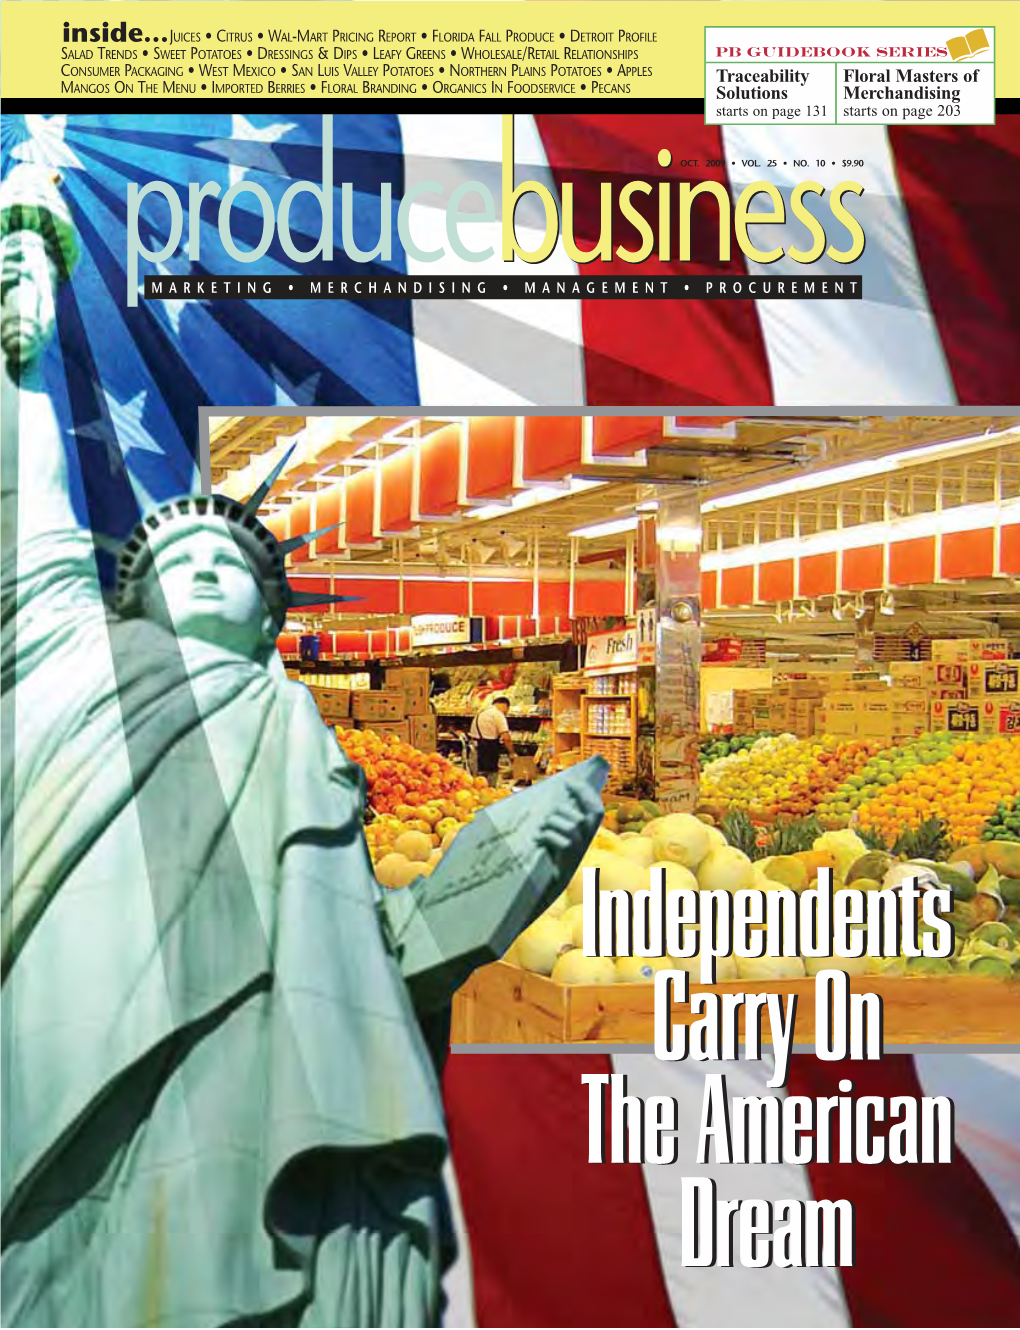 Produce Business October 2009